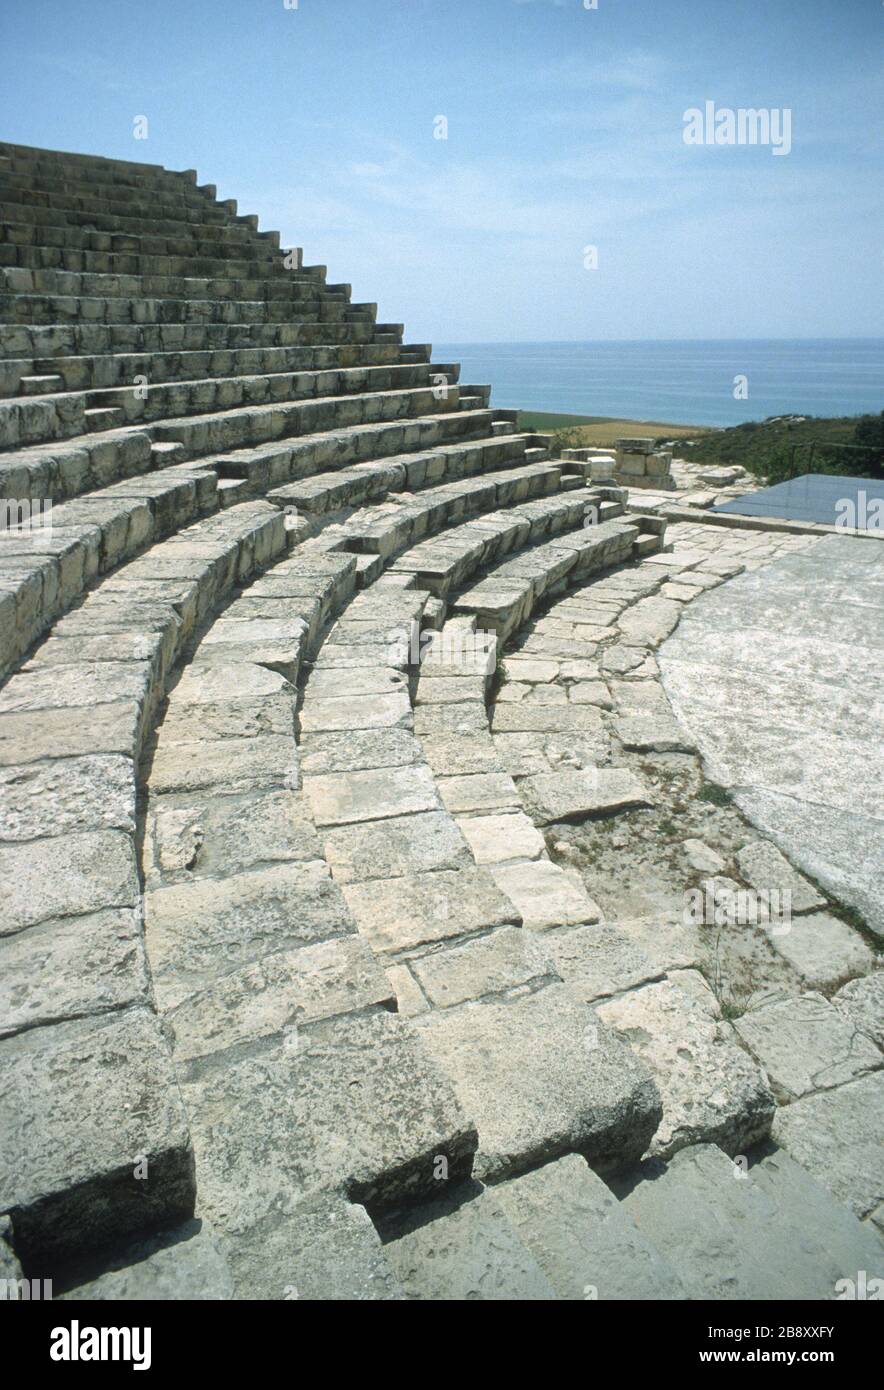 Remains of the spectacular, cliff-top Greek theatre in Kourion, Episkopi, Limassol, Cyprus. Stone seating in circular rows in the auditorium and the steps used to reach each level. Blue sky and the deep blue Mediterranean sea in the background. Stock Photo